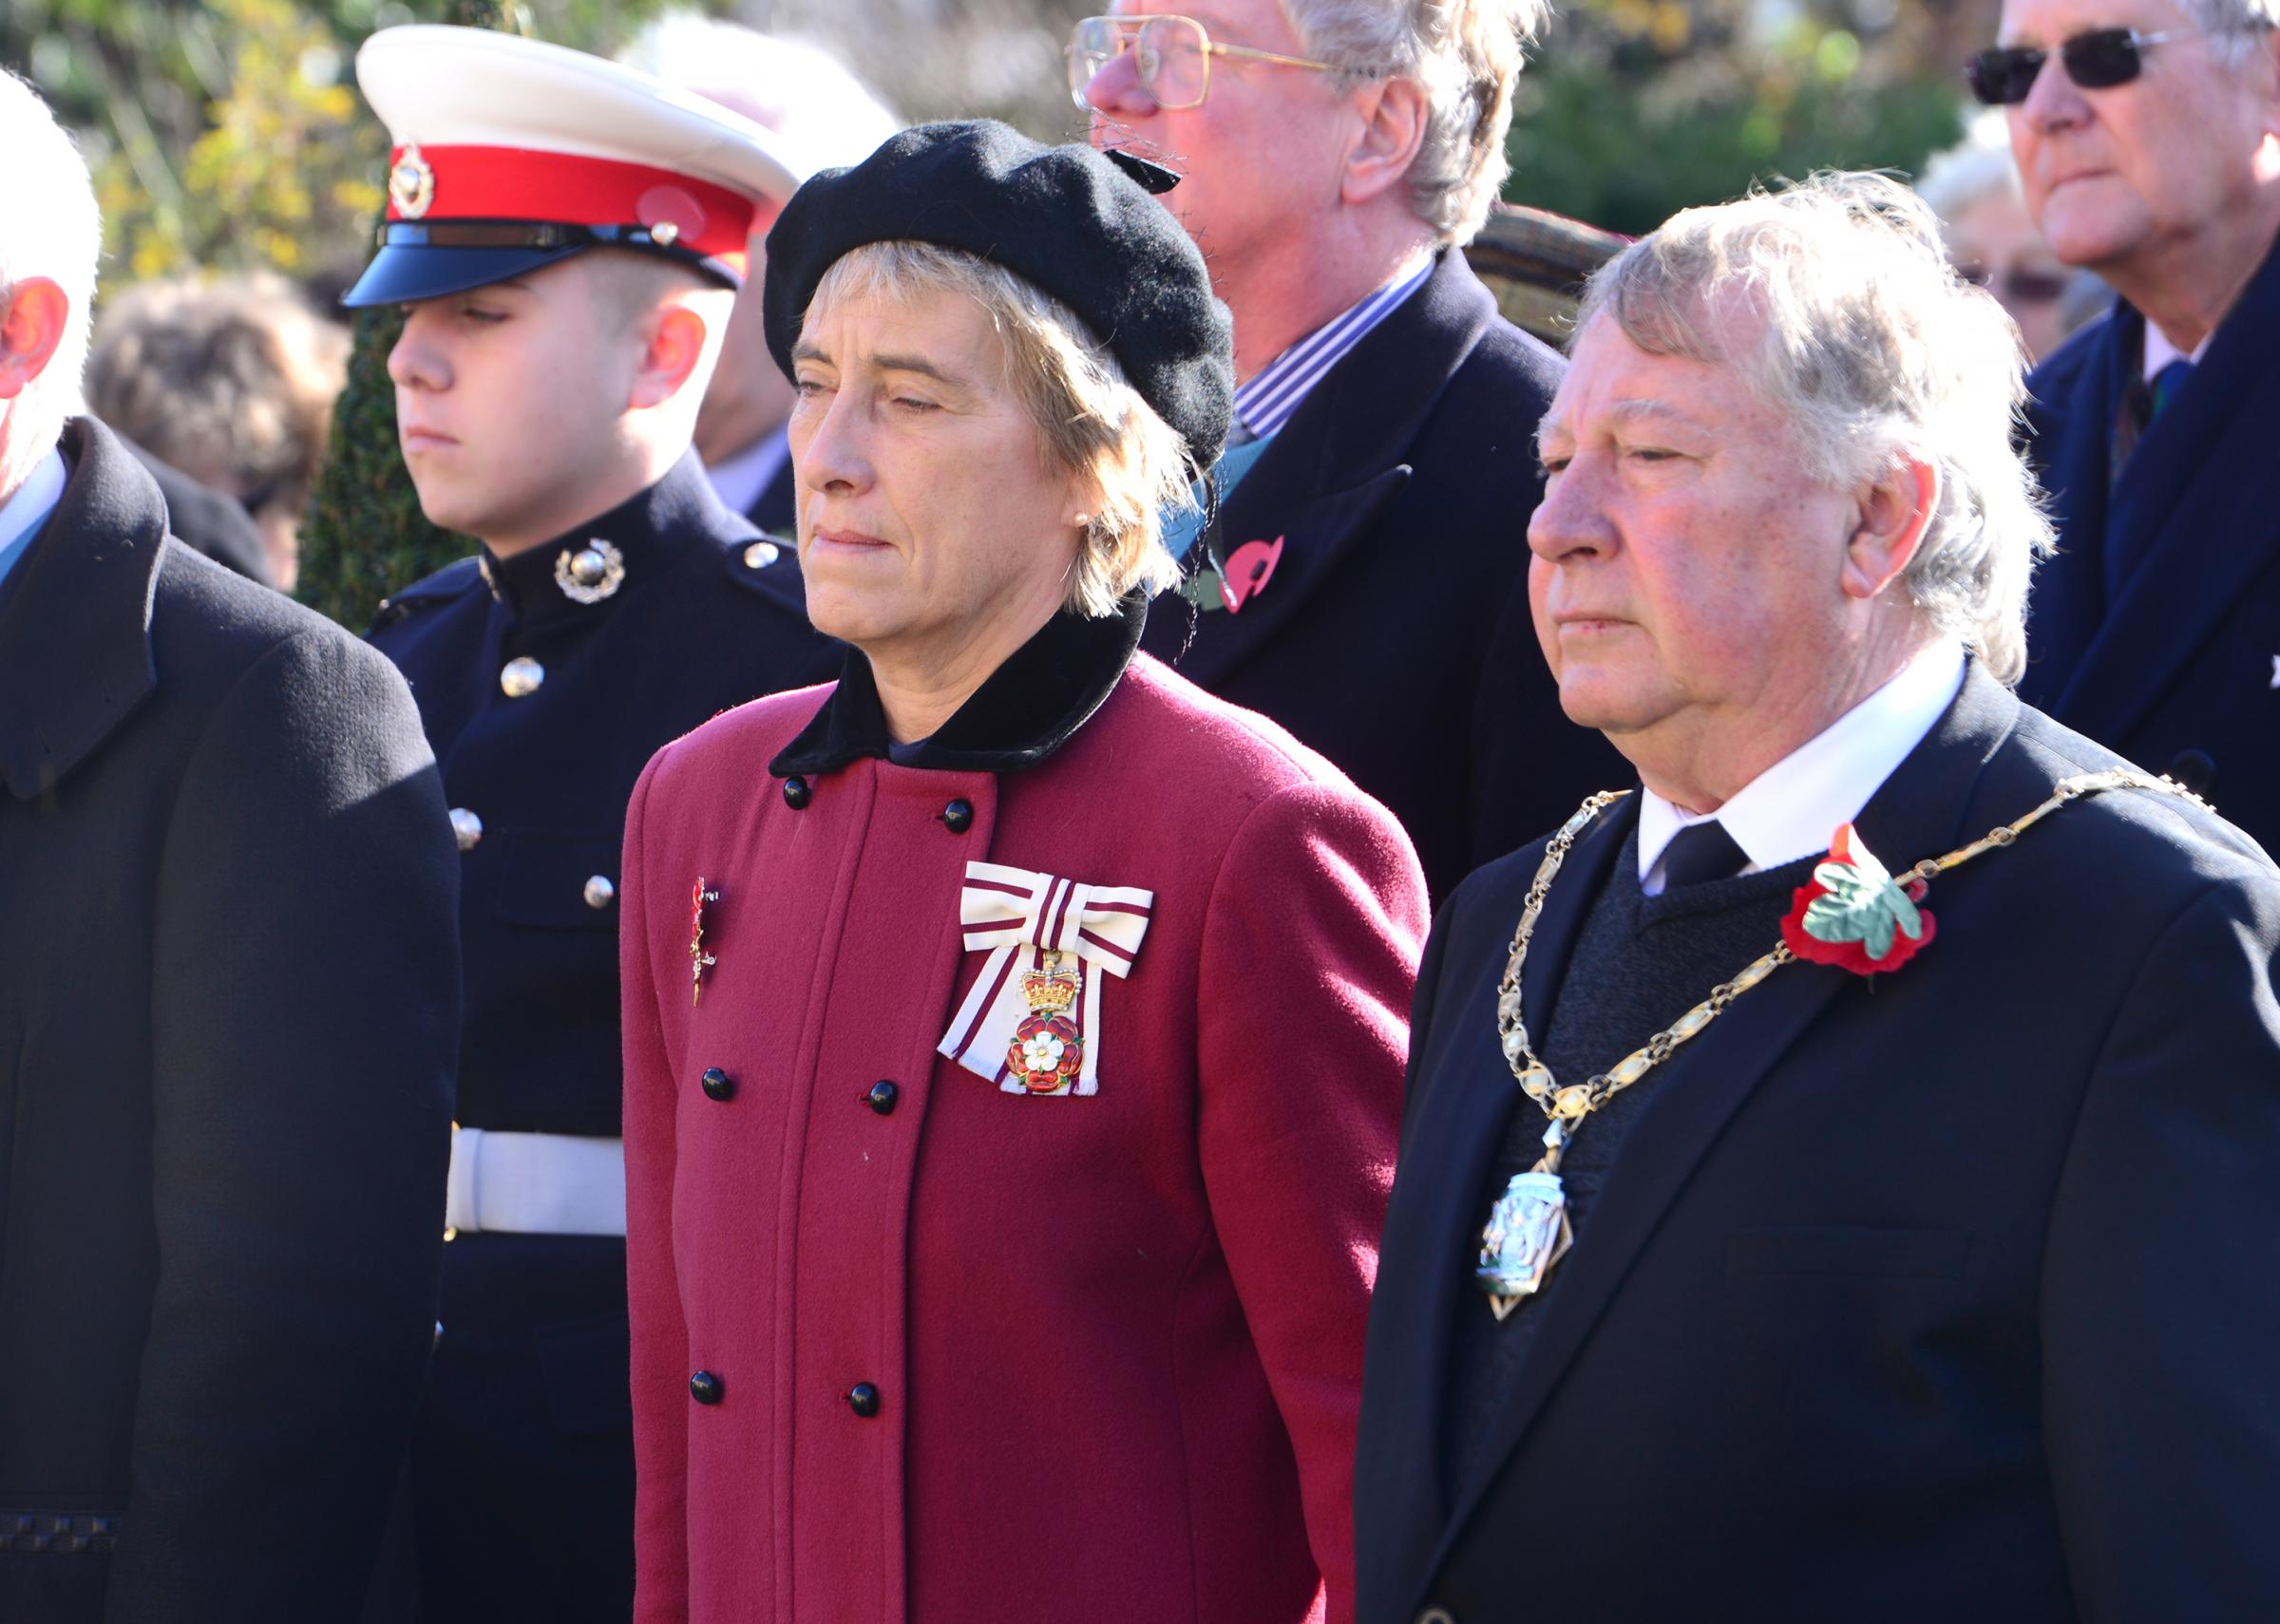 Carisbrooke Castle - Rememberance Service - IWC led service held in the field of rememberance - Lord Lieutenant Susie Sheldon and Cllr George Cameron.